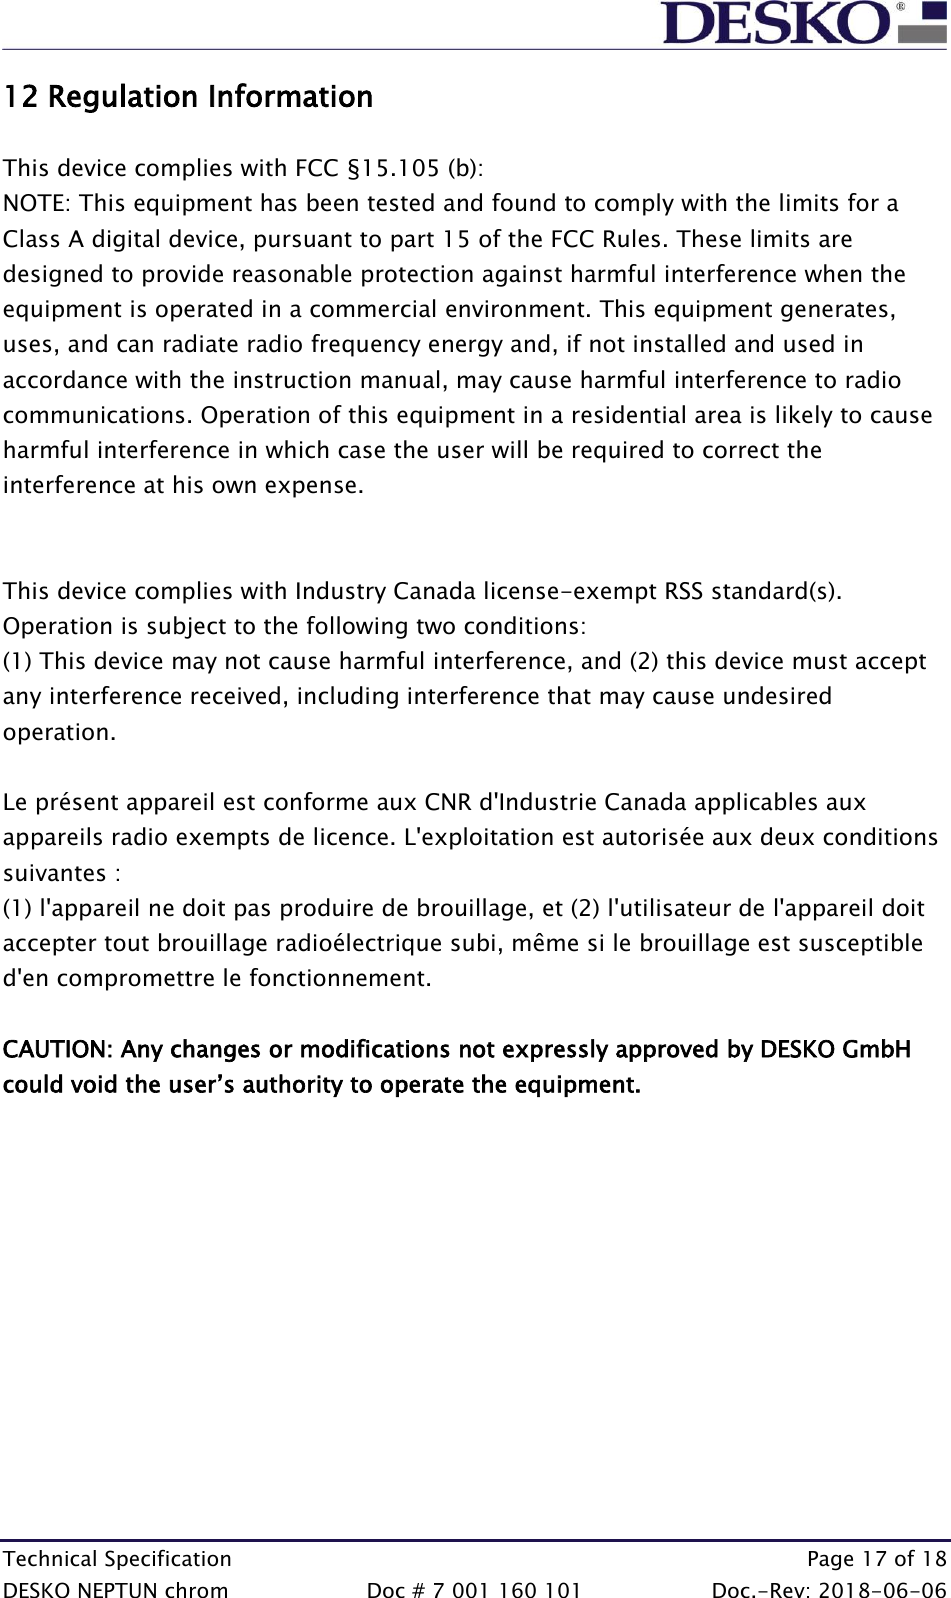  Technical Specification    Page 17 of 18 DESKO NEPTUN chrom  Doc # 7 001 160 101  Doc.-Rev: 2018-06-06 12 Regulation Information  This device complies with FCC §15.105 (b): NOTE: This equipment has been tested and found to comply with the limits for a Class A digital device, pursuant to part 15 of the FCC Rules. These limits are designed to provide reasonable protection against harmful interference when the equipment is operated in a commercial environment. This equipment generates, uses, and can radiate radio frequency energy and, if not installed and used in accordance with the instruction manual, may cause harmful interference to radio communications. Operation of this equipment in a residential area is likely to cause harmful interference in which case the user will be required to correct the interference at his own expense.   This device complies with Industry Canada license-exempt RSS standard(s). Operation is subject to the following two conditions: (1) This device may not cause harmful interference, and (2) this device must accept any interference received, including interference that may cause undesired operation.  Le présent appareil est conforme aux CNR d&apos;Industrie Canada applicables aux appareils radio exempts de licence. L&apos;exploitation est autorisée aux deux conditions suivantes :  (1) l&apos;appareil ne doit pas produire de brouillage, et (2) l&apos;utilisateur de l&apos;appareil doit accepter tout brouillage radioélectrique subi, même si le brouillage est susceptible d&apos;en compromettre le fonctionnement.  CAUTION: Any changes or modifications not expressly approved by DESKO GmbH could void the user’s authority to operate the equipment.   